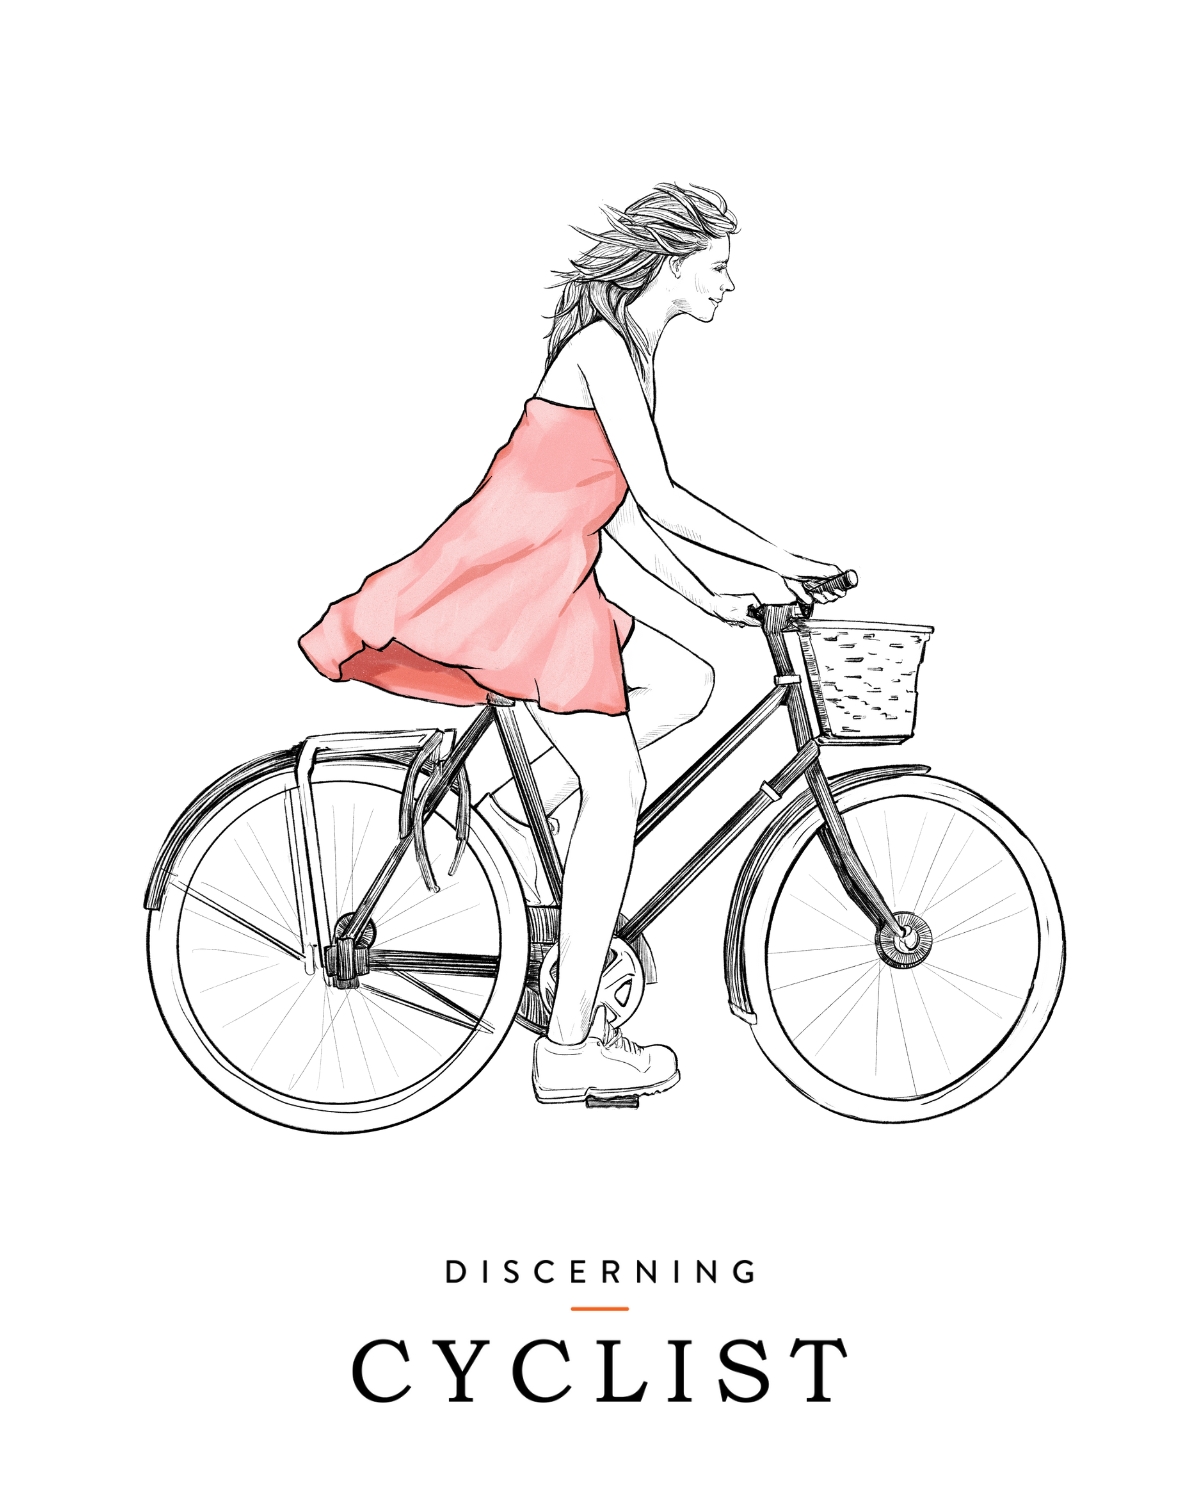 Female cycling in dress illustration